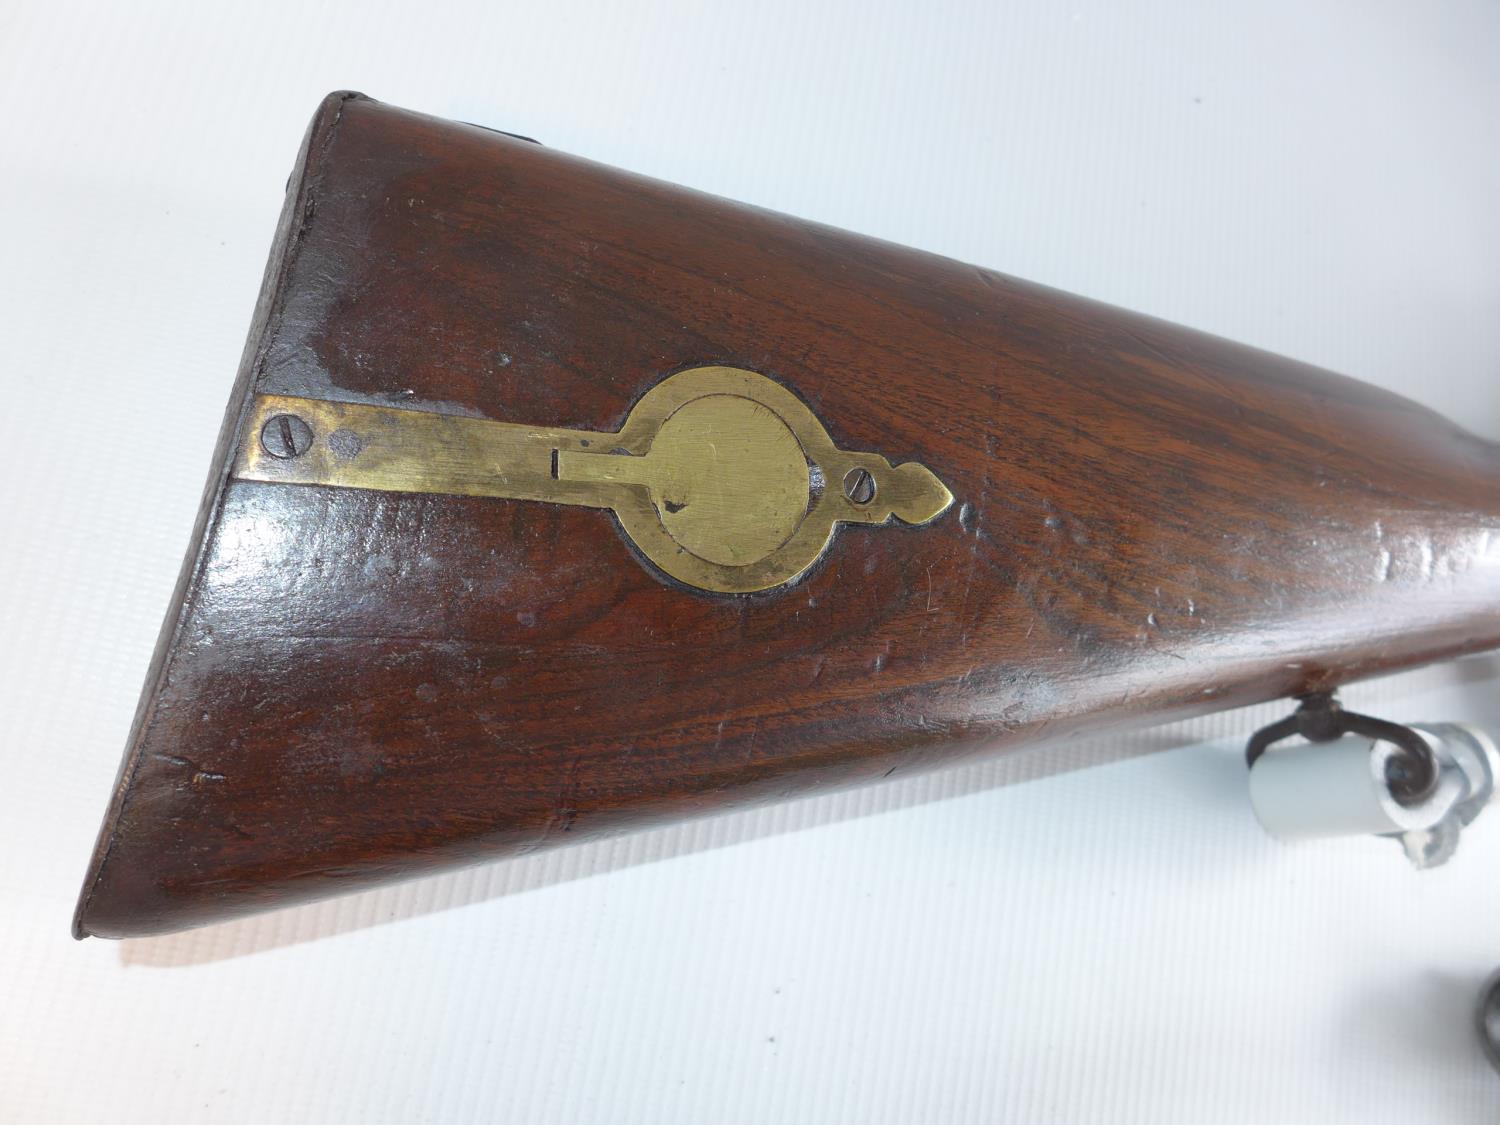 AN EAST INDIA COMPANY PERCUSSION CAP BROWN BESS MUSKET AND BAYONET, LOCK MARKED HURST, LENGTH OF - Image 3 of 11